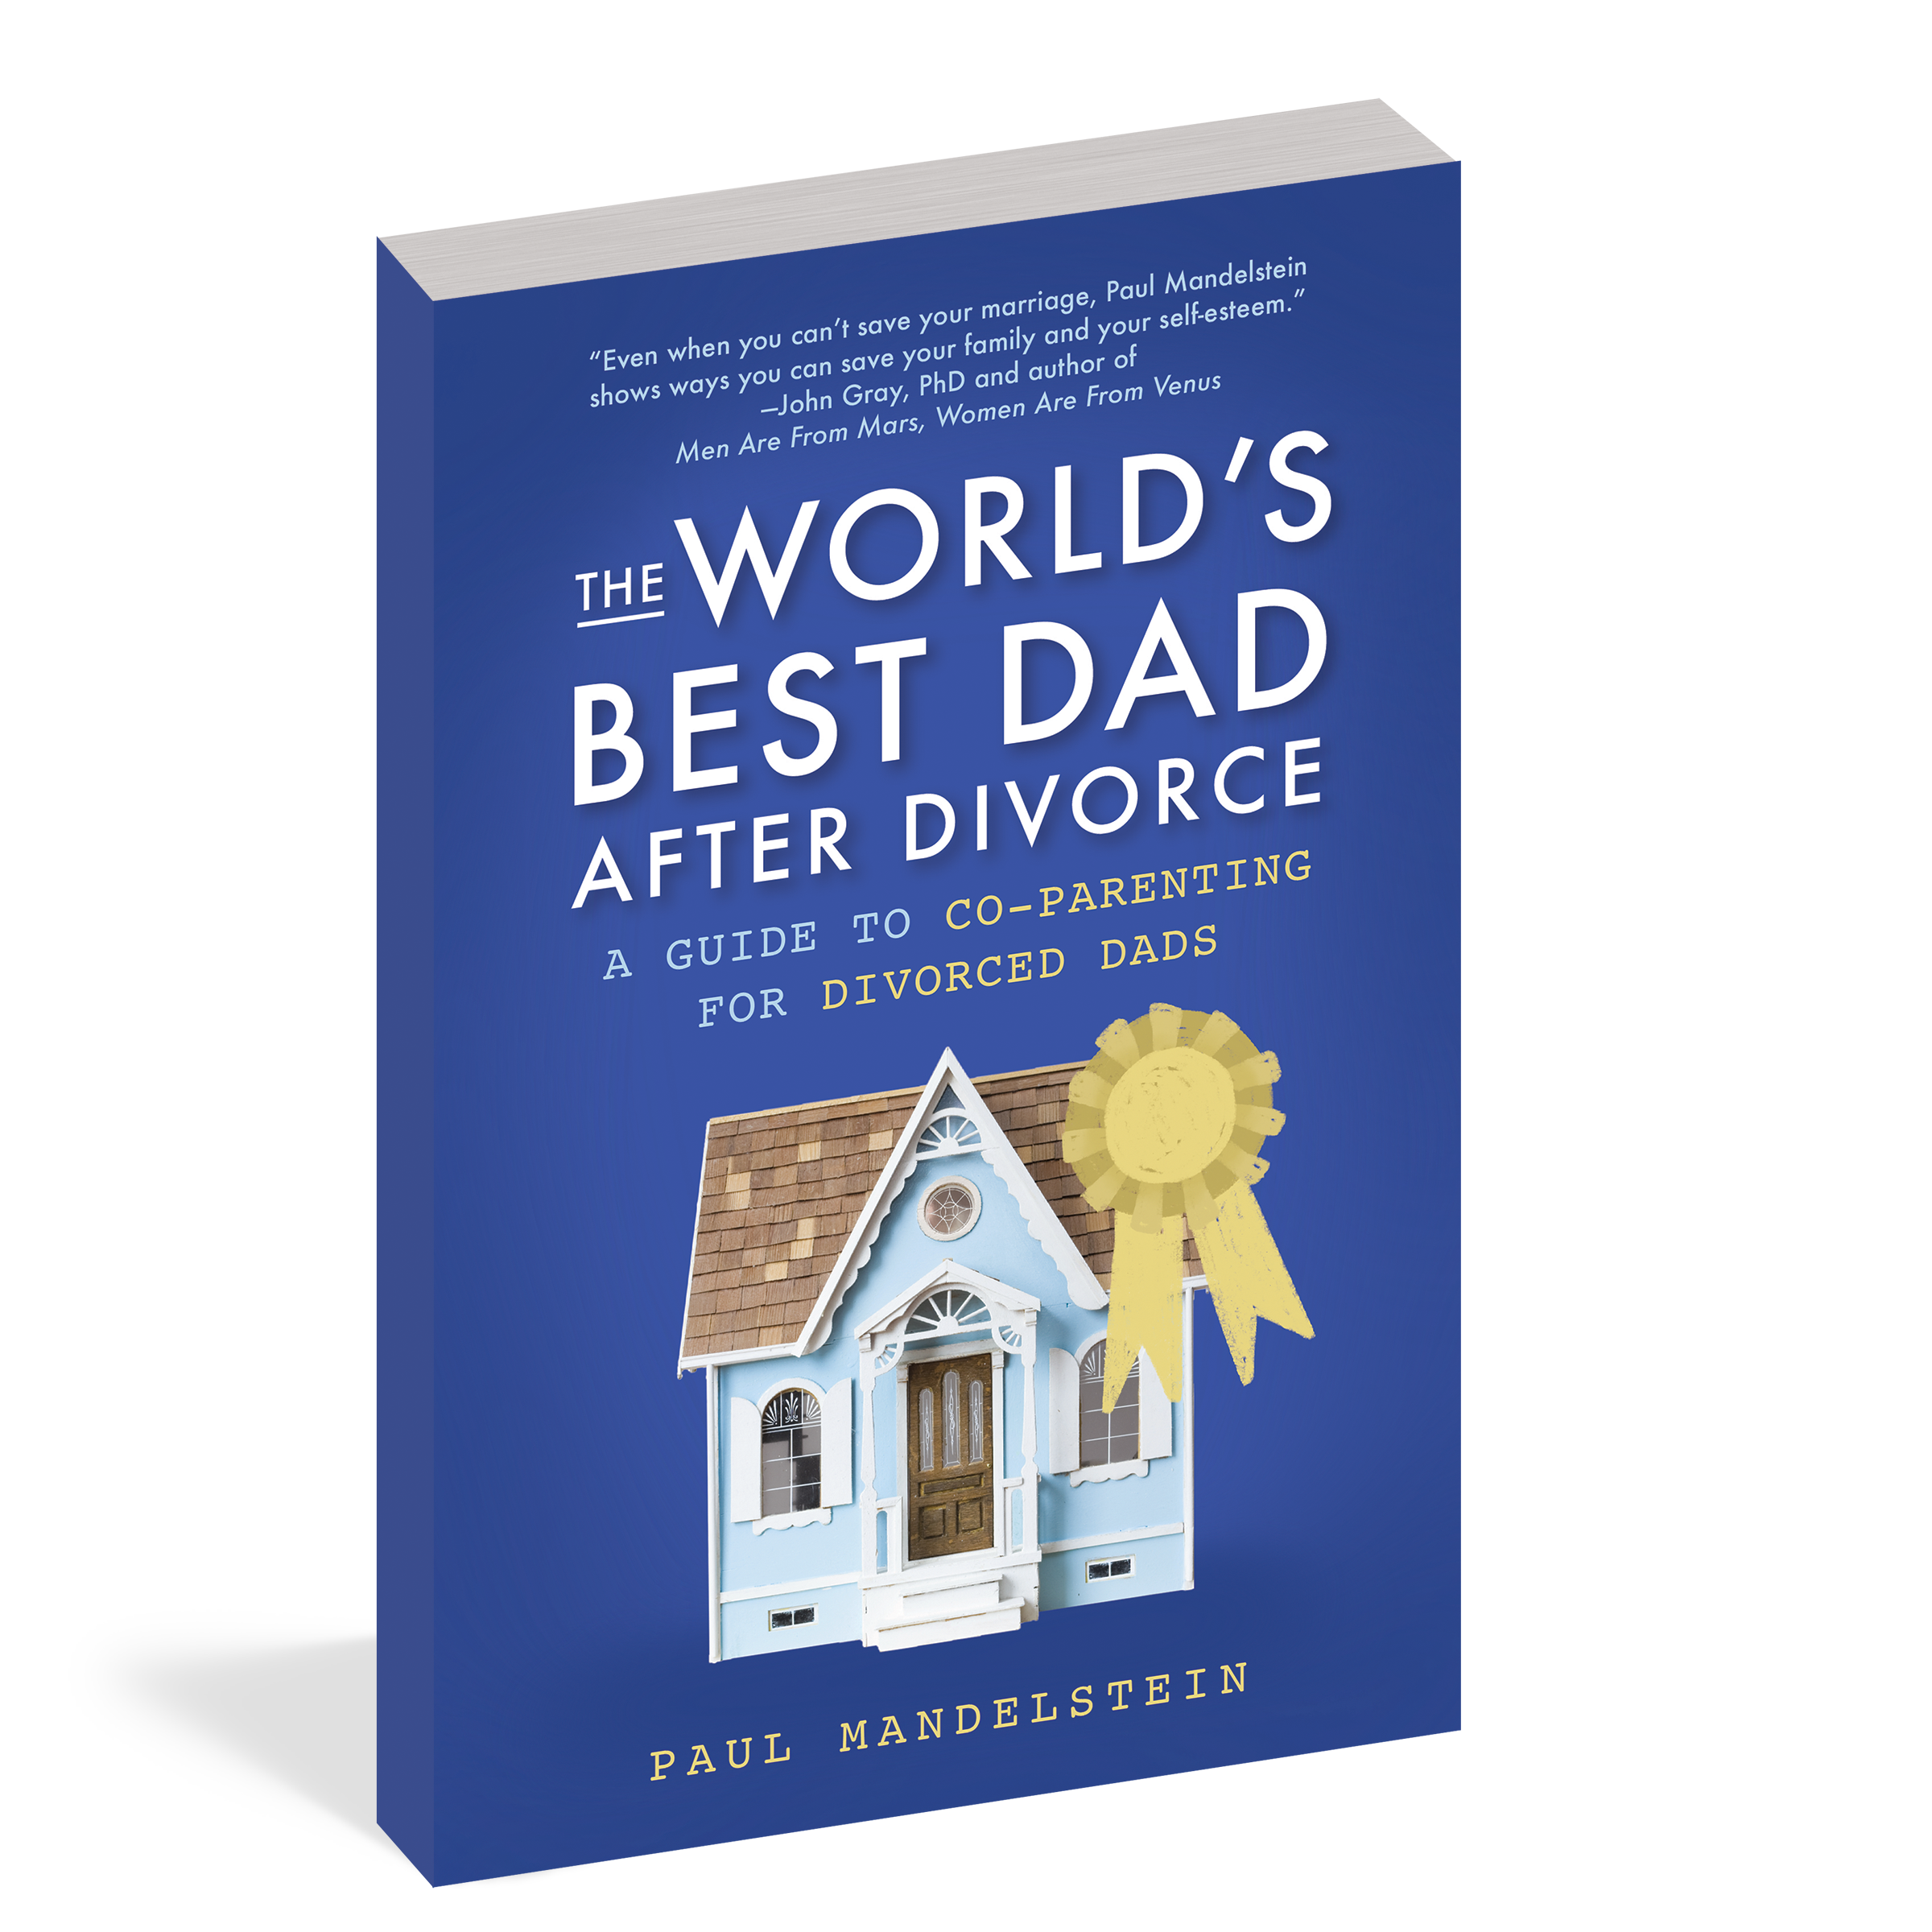 The cover of the book The World's Best Dad During and After Divorce.